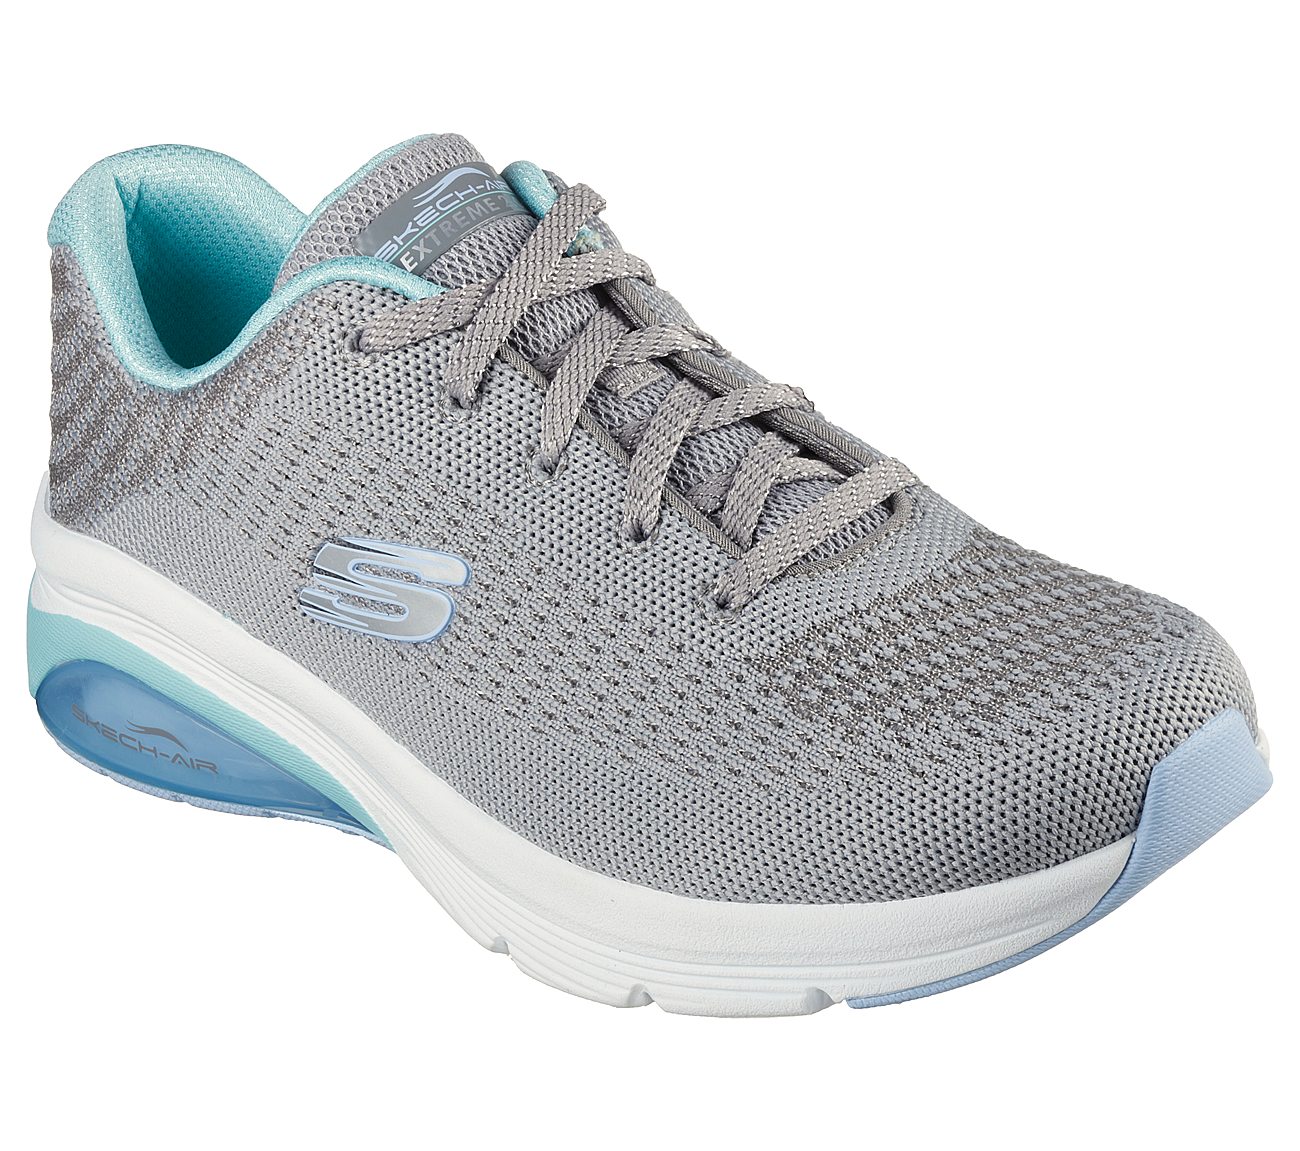 SKECH-AIR EXTREME 2.0-CLASSIC, GREY/MINT Footwear Lateral View